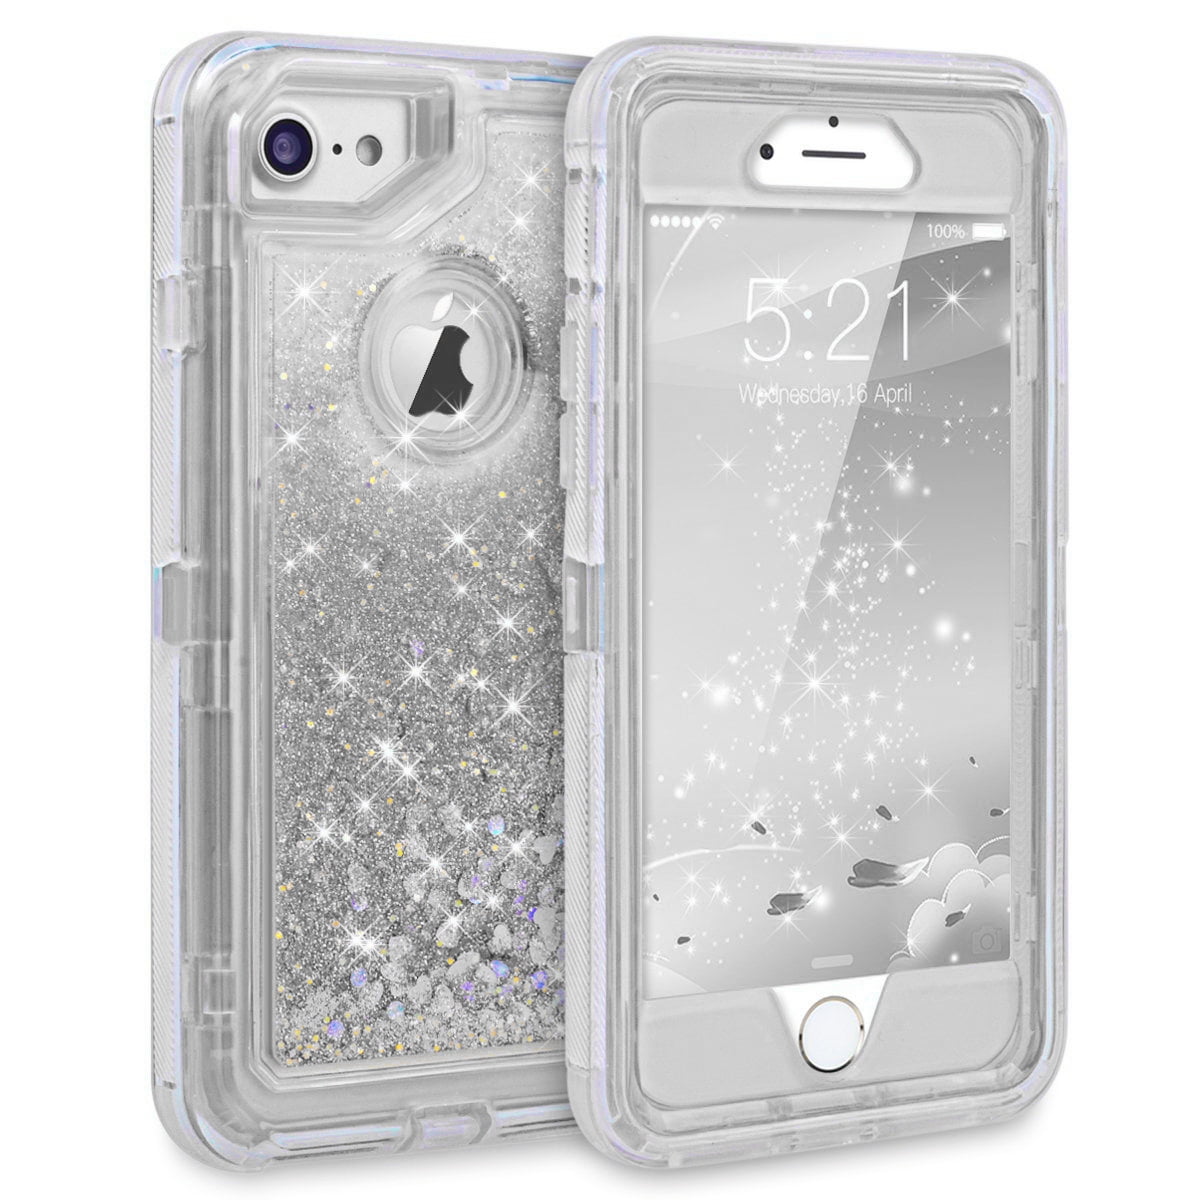 MAXCURY for iPhone 8/7/6 Plus, Sparkle Bling 3D Glitter Flowing Liquid  Quicksand Protective Case for Girls & Women, Heavy Duty Shockproof Phone  Cover